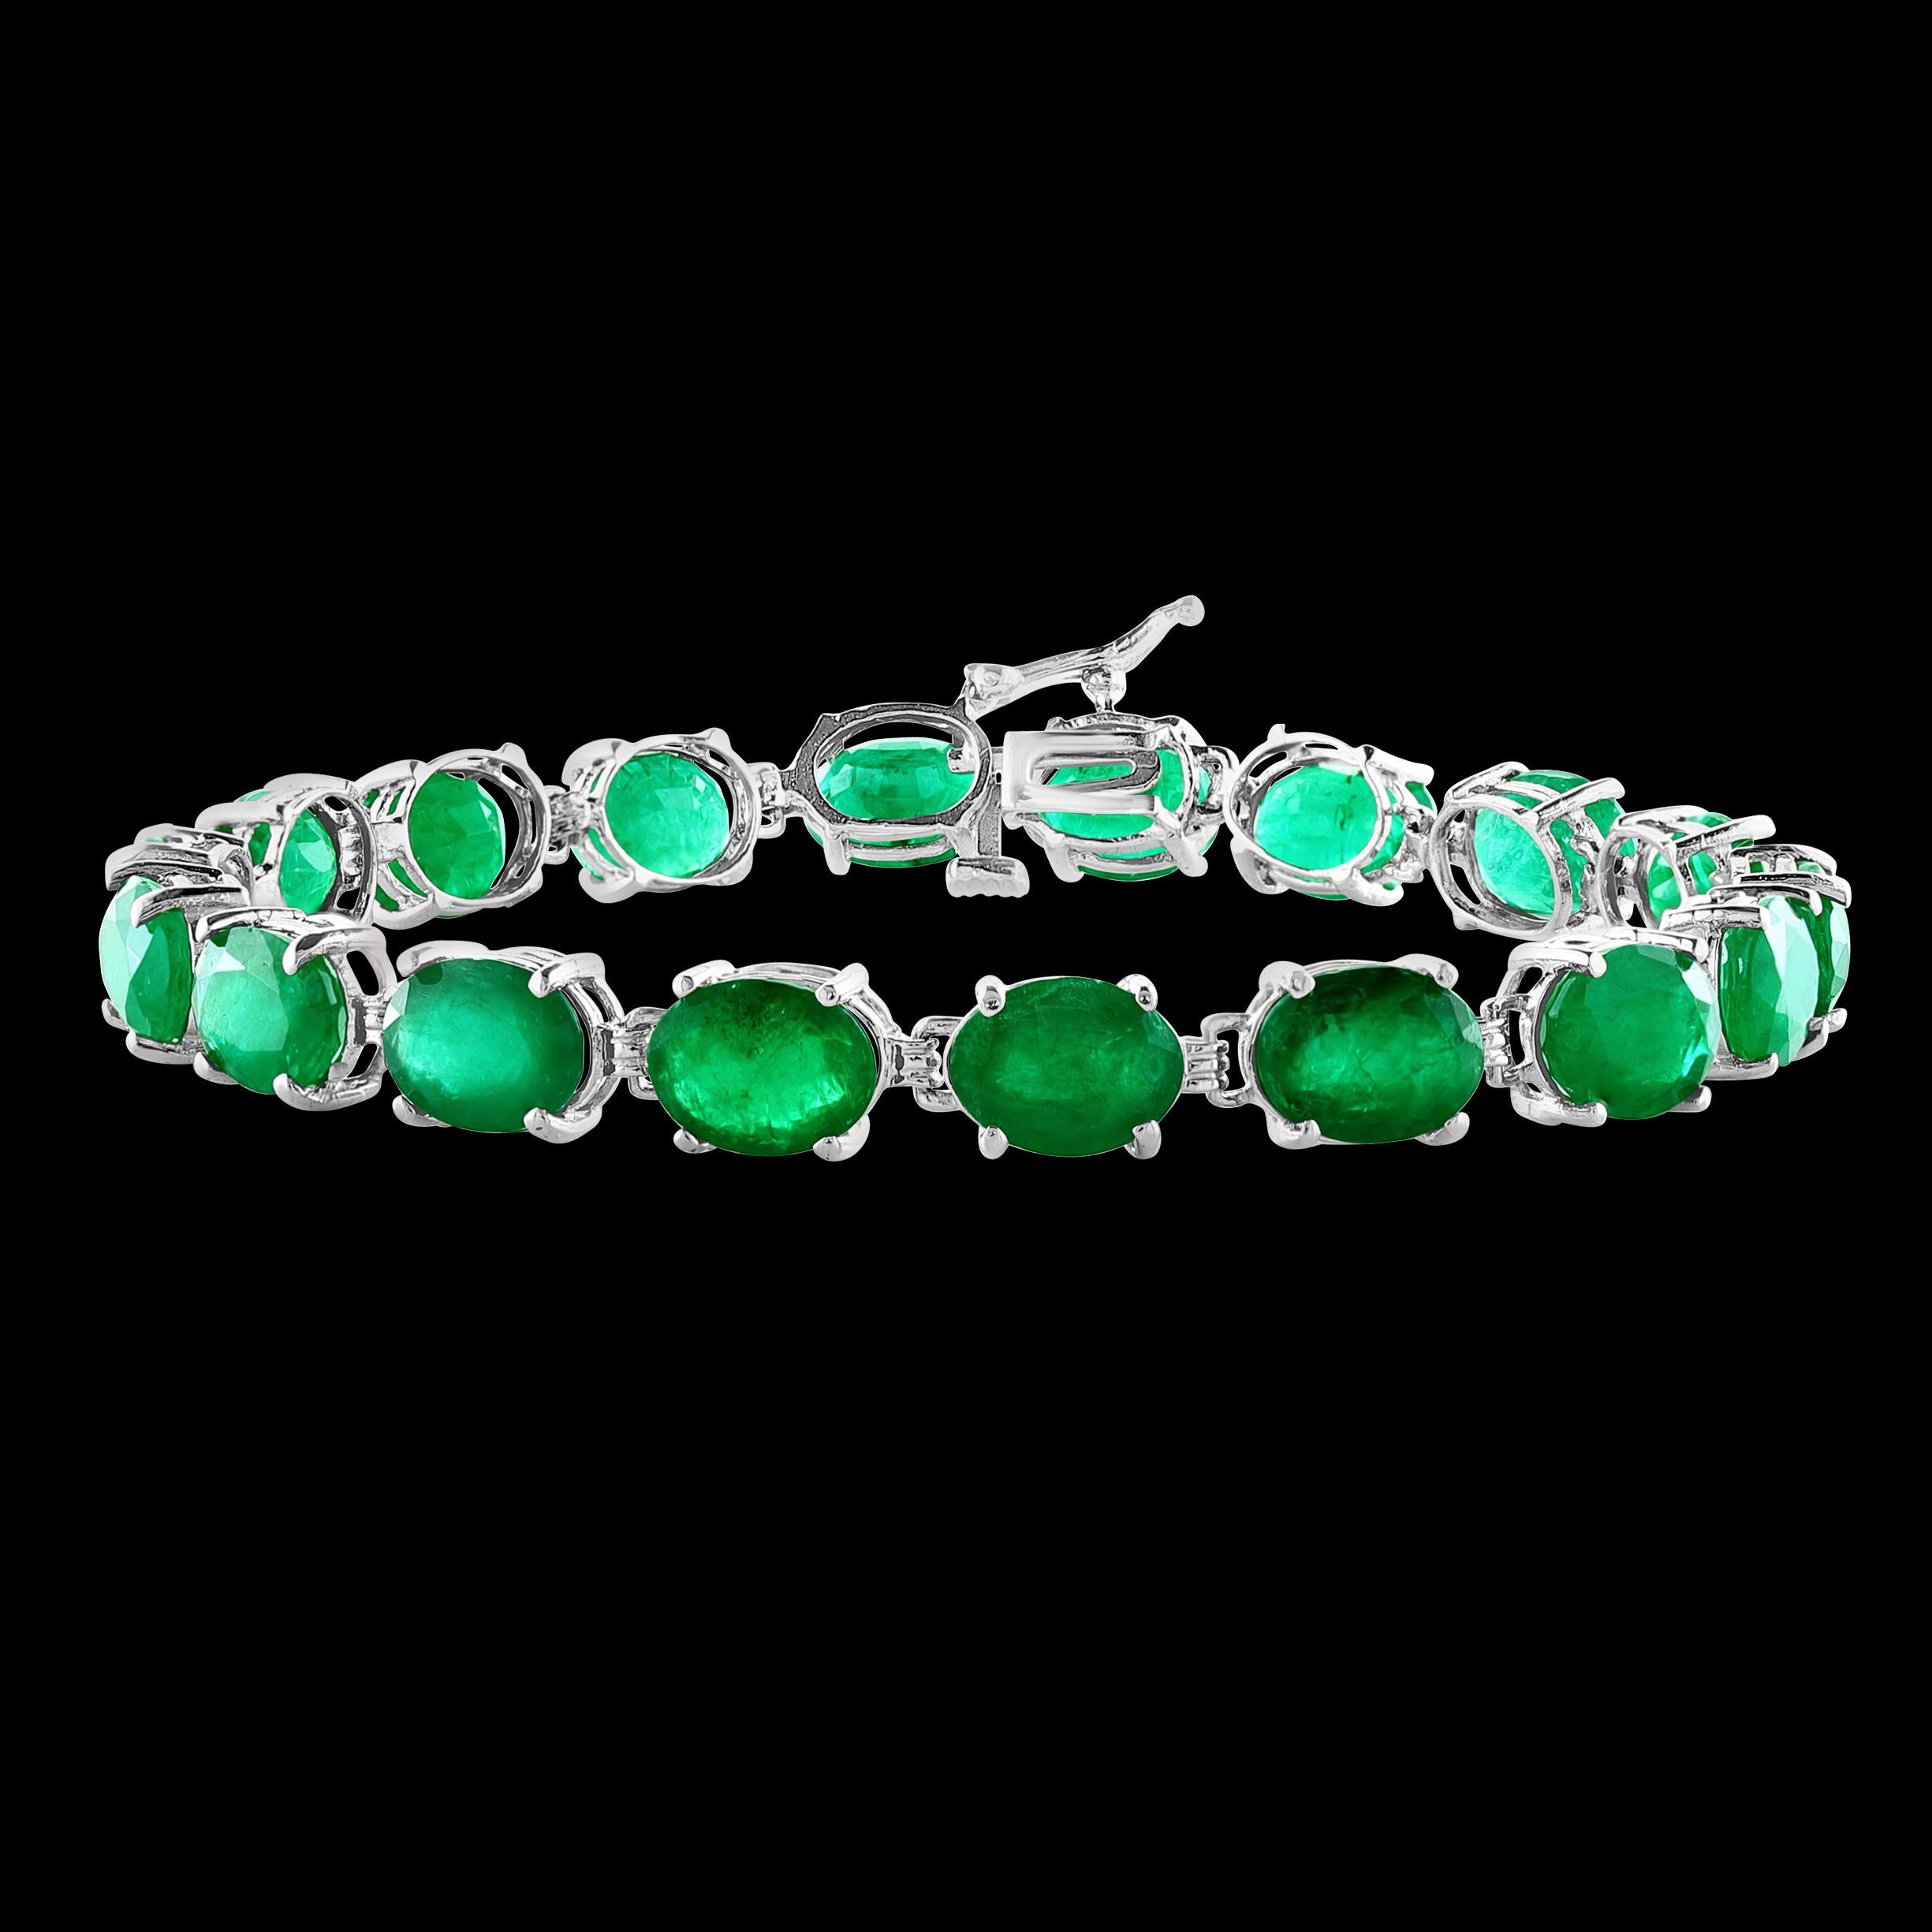  This exceptionally affordable Tennis  bracelet has  18 stones of oval  Emeralds  .  Total weight of the Emeralds is  approximately 23 carat. 
The bracelet is expertly crafted with 10.5  grams of  14 karat White  gold . Have a safety clasp